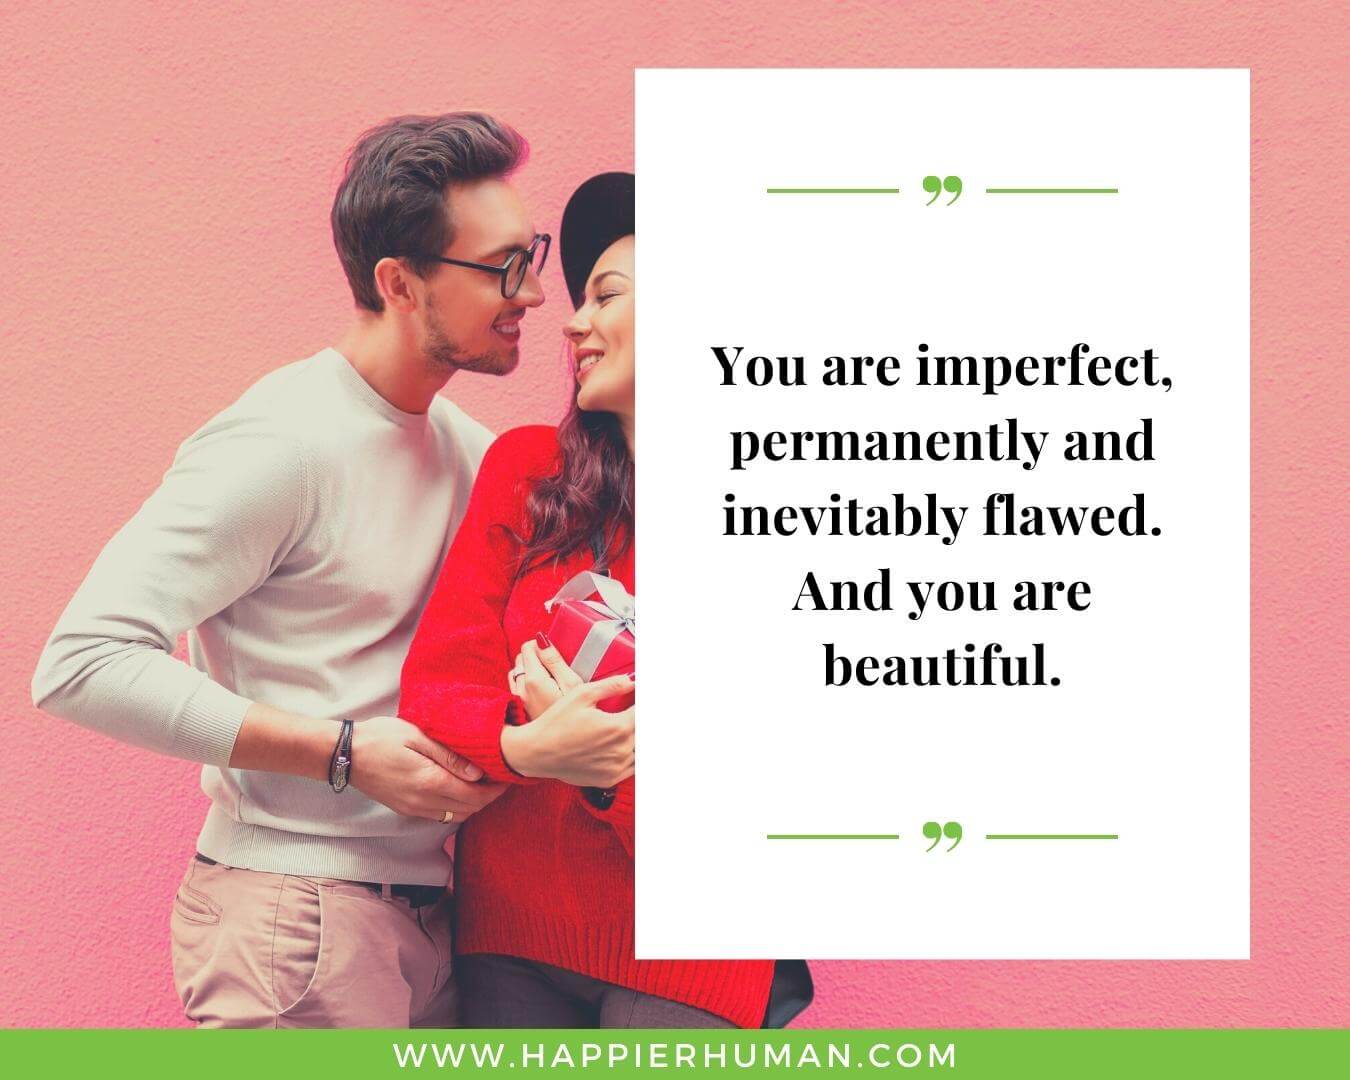 Unconditional Love Quotes for Her - “You are imperfect, permanently and inevitably flawed. And you are beautiful.”